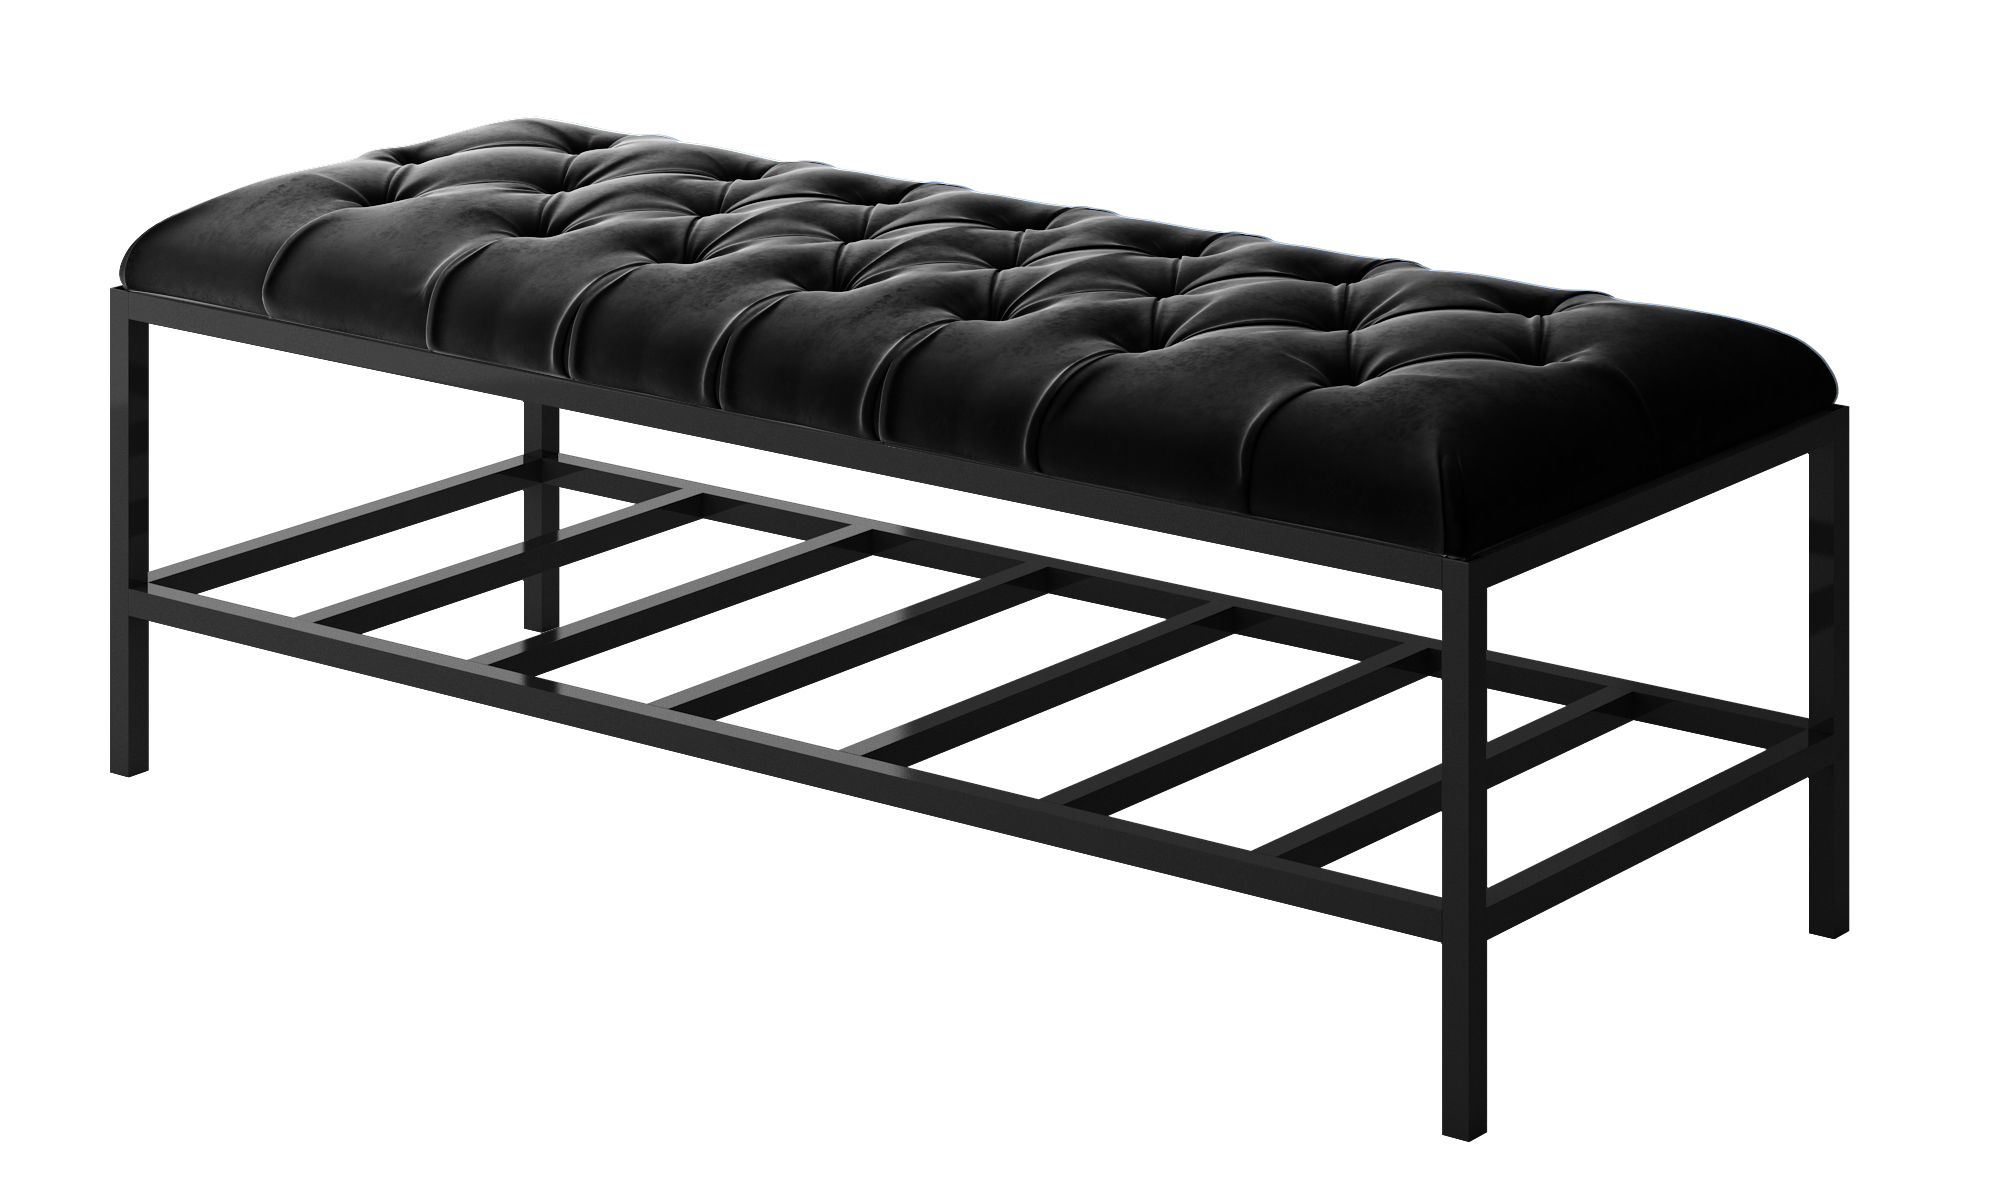 Modern Bench | Bed Benches | Tufted Bench | Contemporary Bench ...